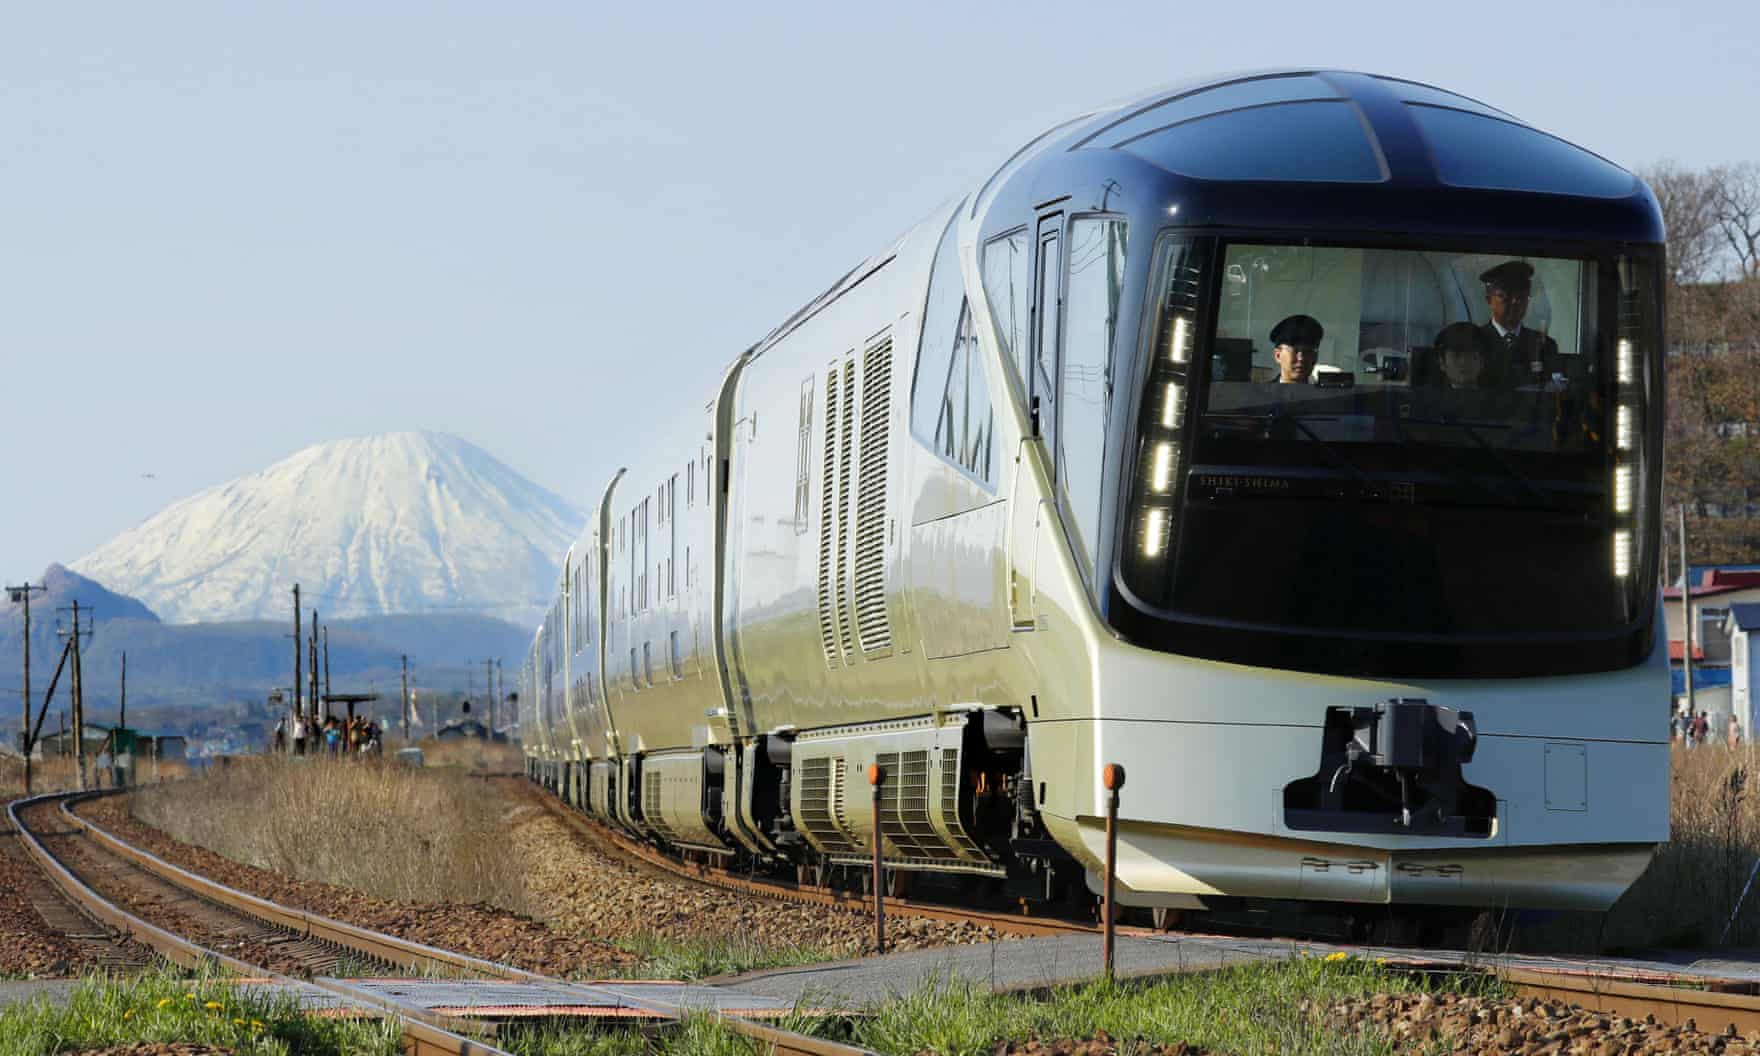 The train passes through Date, Hokkaido, with Mount Yotei in the background